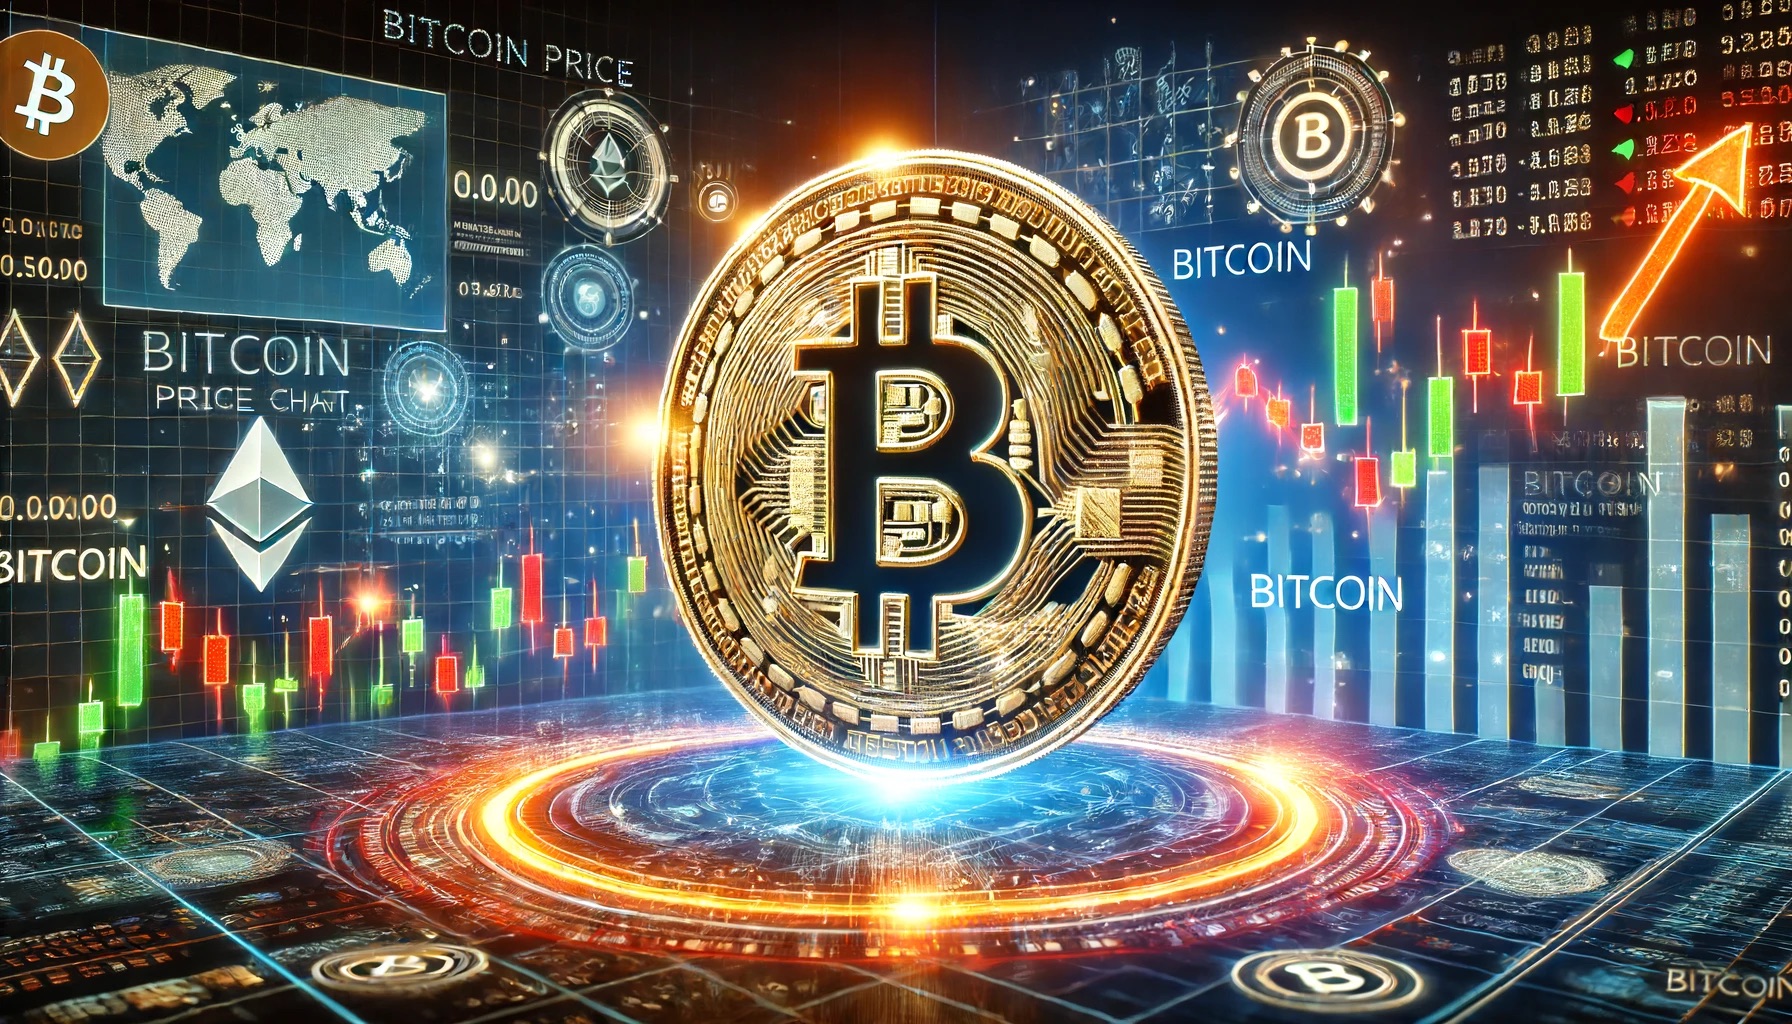 Analyst Who Correctly Predicted Bitcoins Surge And Crash Reveals Where Price Is Headed Next